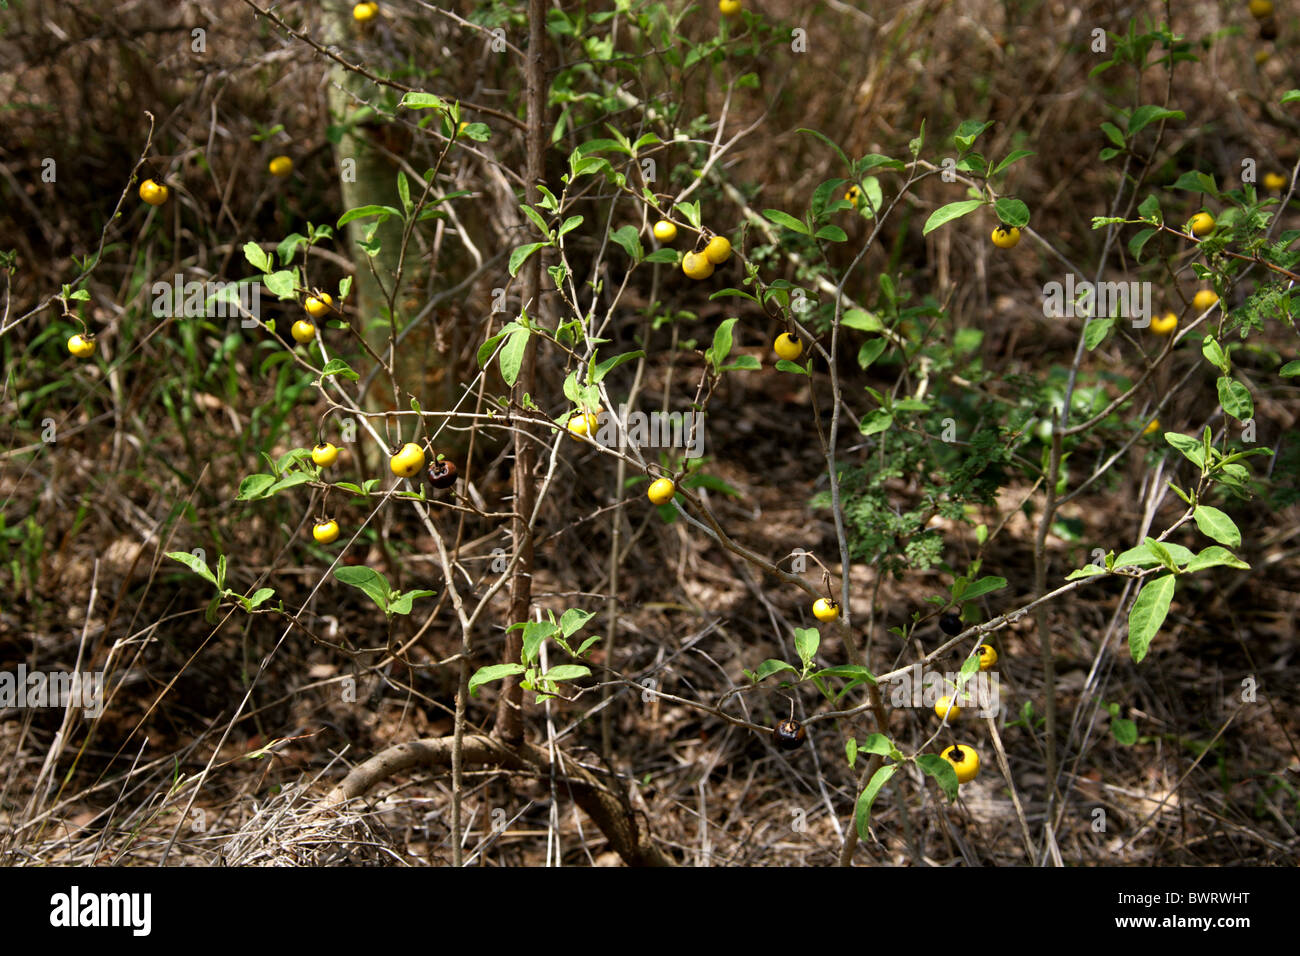 Spineless Solanum sp., (Solanaceae), with Small Yellow Fruits. Hluhluwe, South Africa Stock Photo